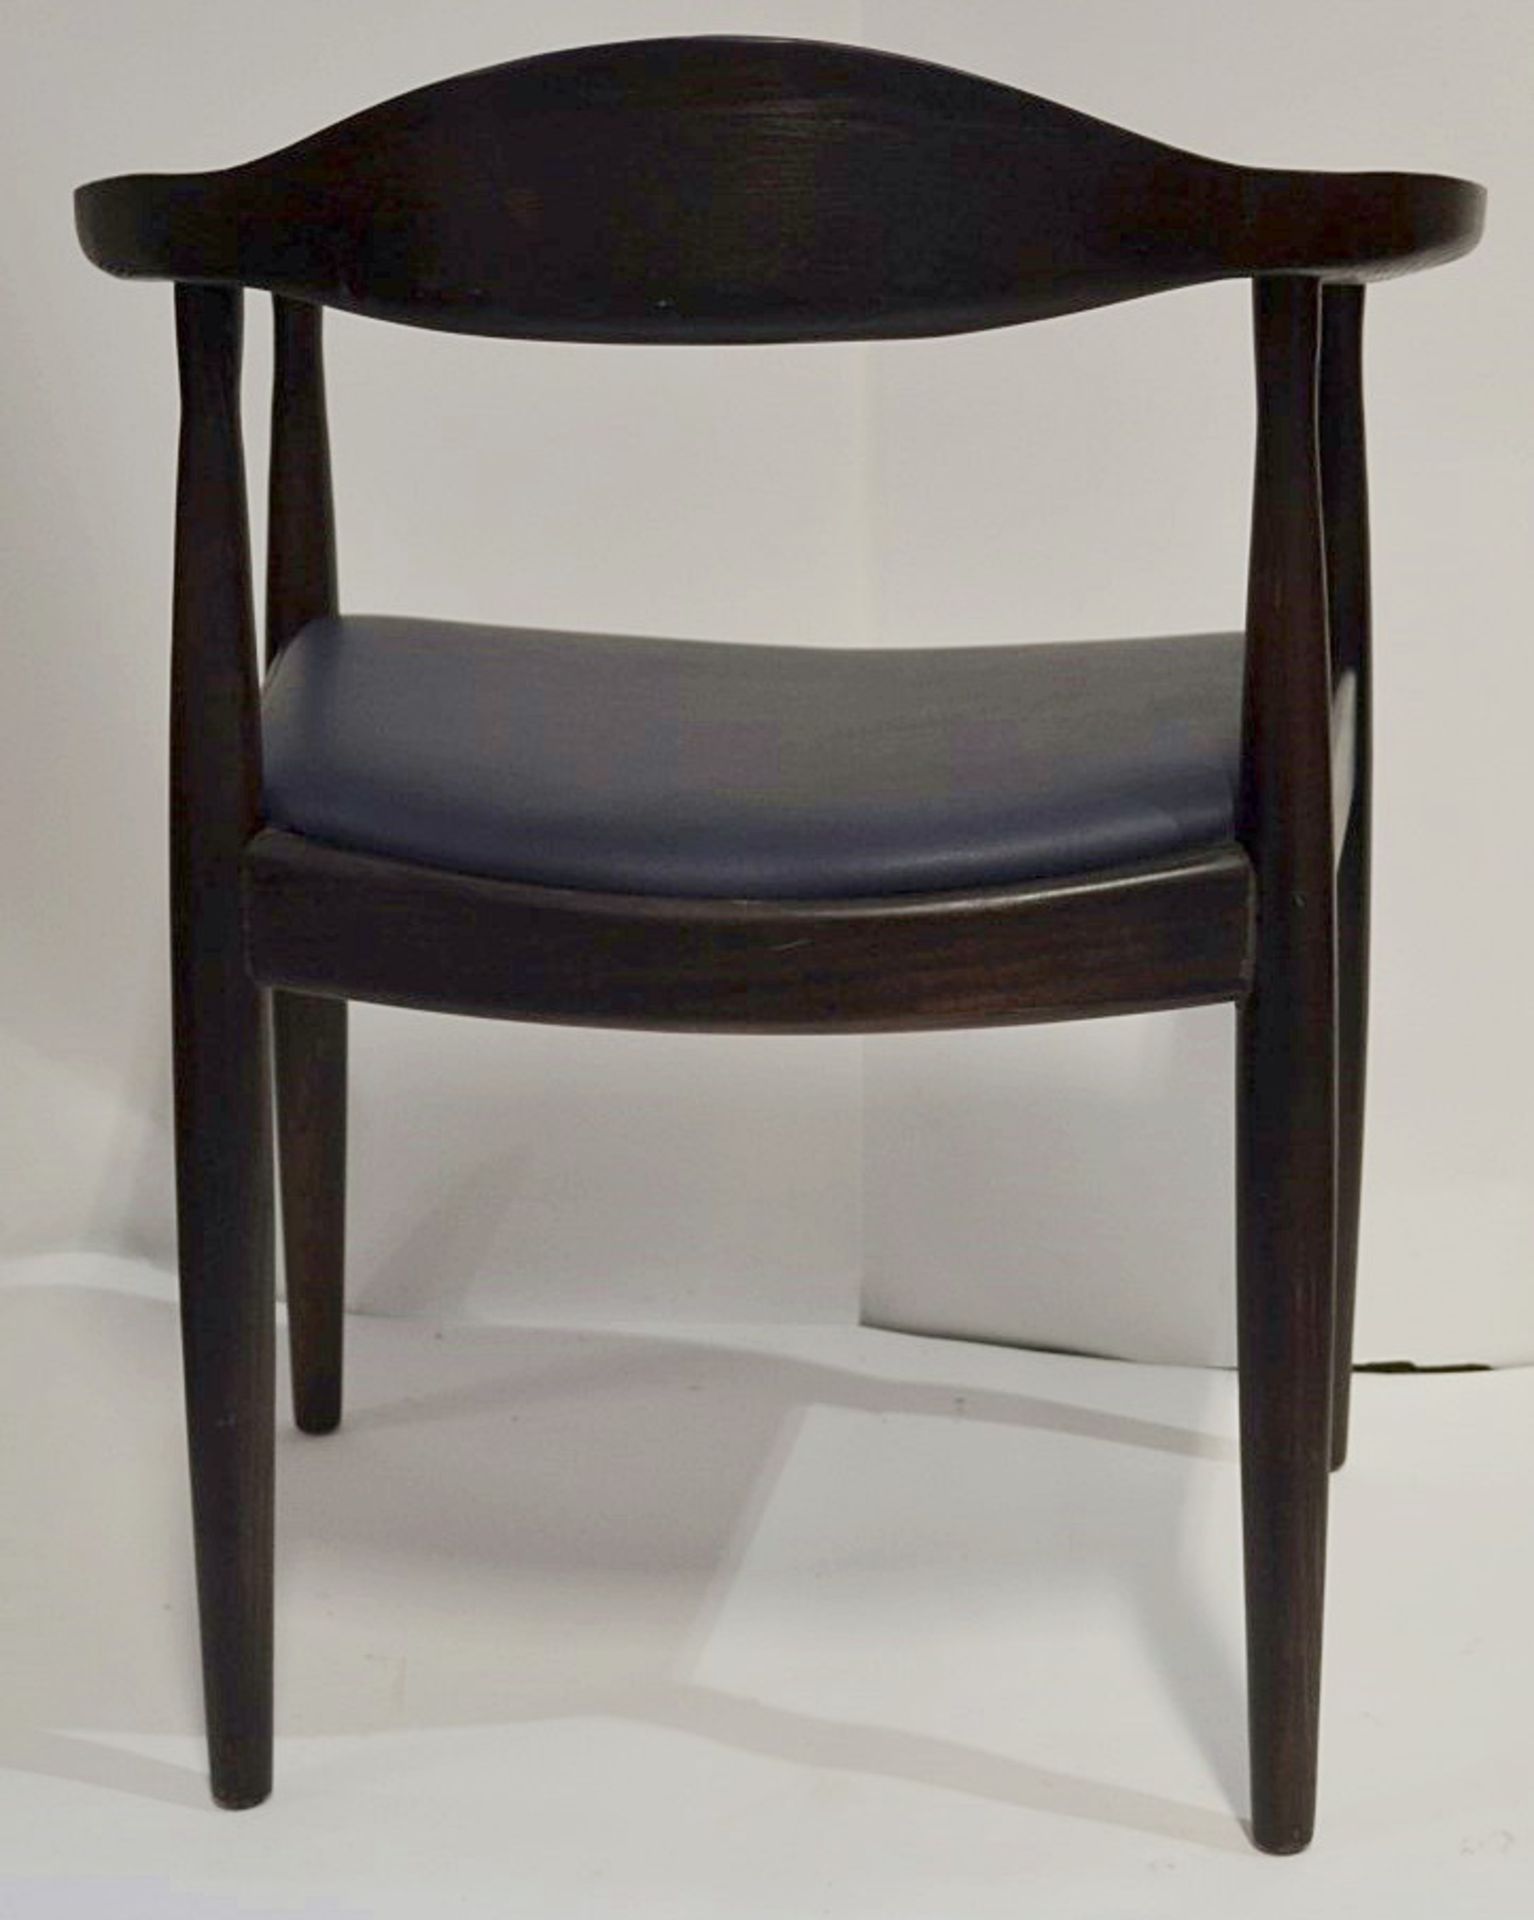 6 x Wooden Restaurant Dining Chairs - Ash Wood Dining Chairs With Dark Finish and Leather - Image 3 of 4